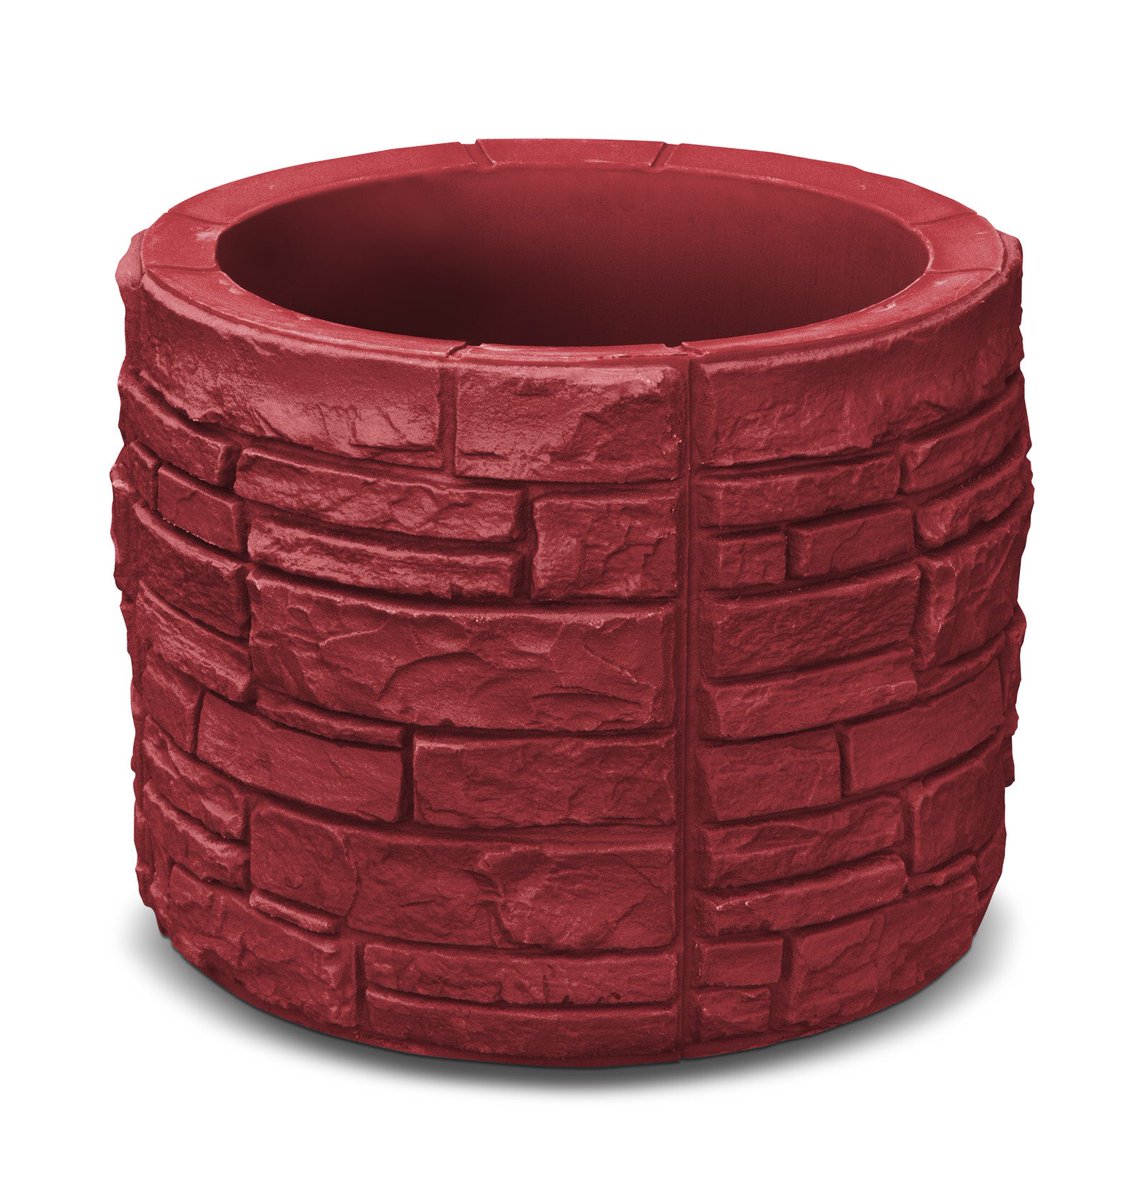 The Sierra Stone 30 Round #selfwateringplanters are available in 17 colors.The Sierra Stone will add beautification to your landscape. Made for all seasons! @DesertPlanters #city #patio #parksandrec #municipality #parklet #landscapedesigner #town #openspaces #greenhouse